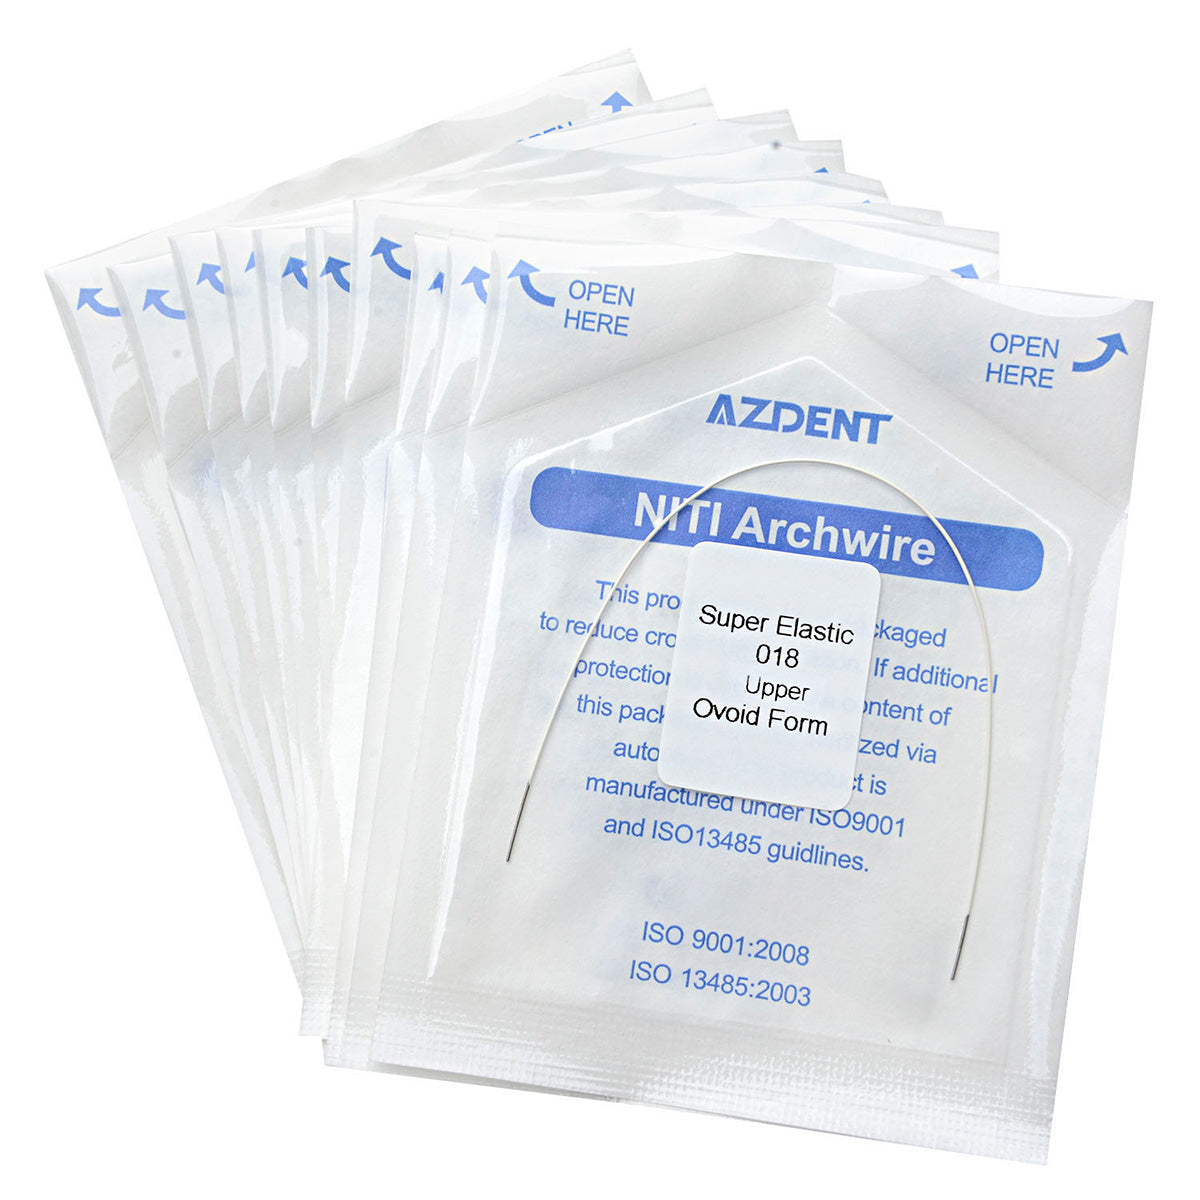 10 Packs AZDENT Archwire NiTi Super Elastic Colored Coated Ovoid Round 0.018 Upper 1pcs/Pack - azdentall.com